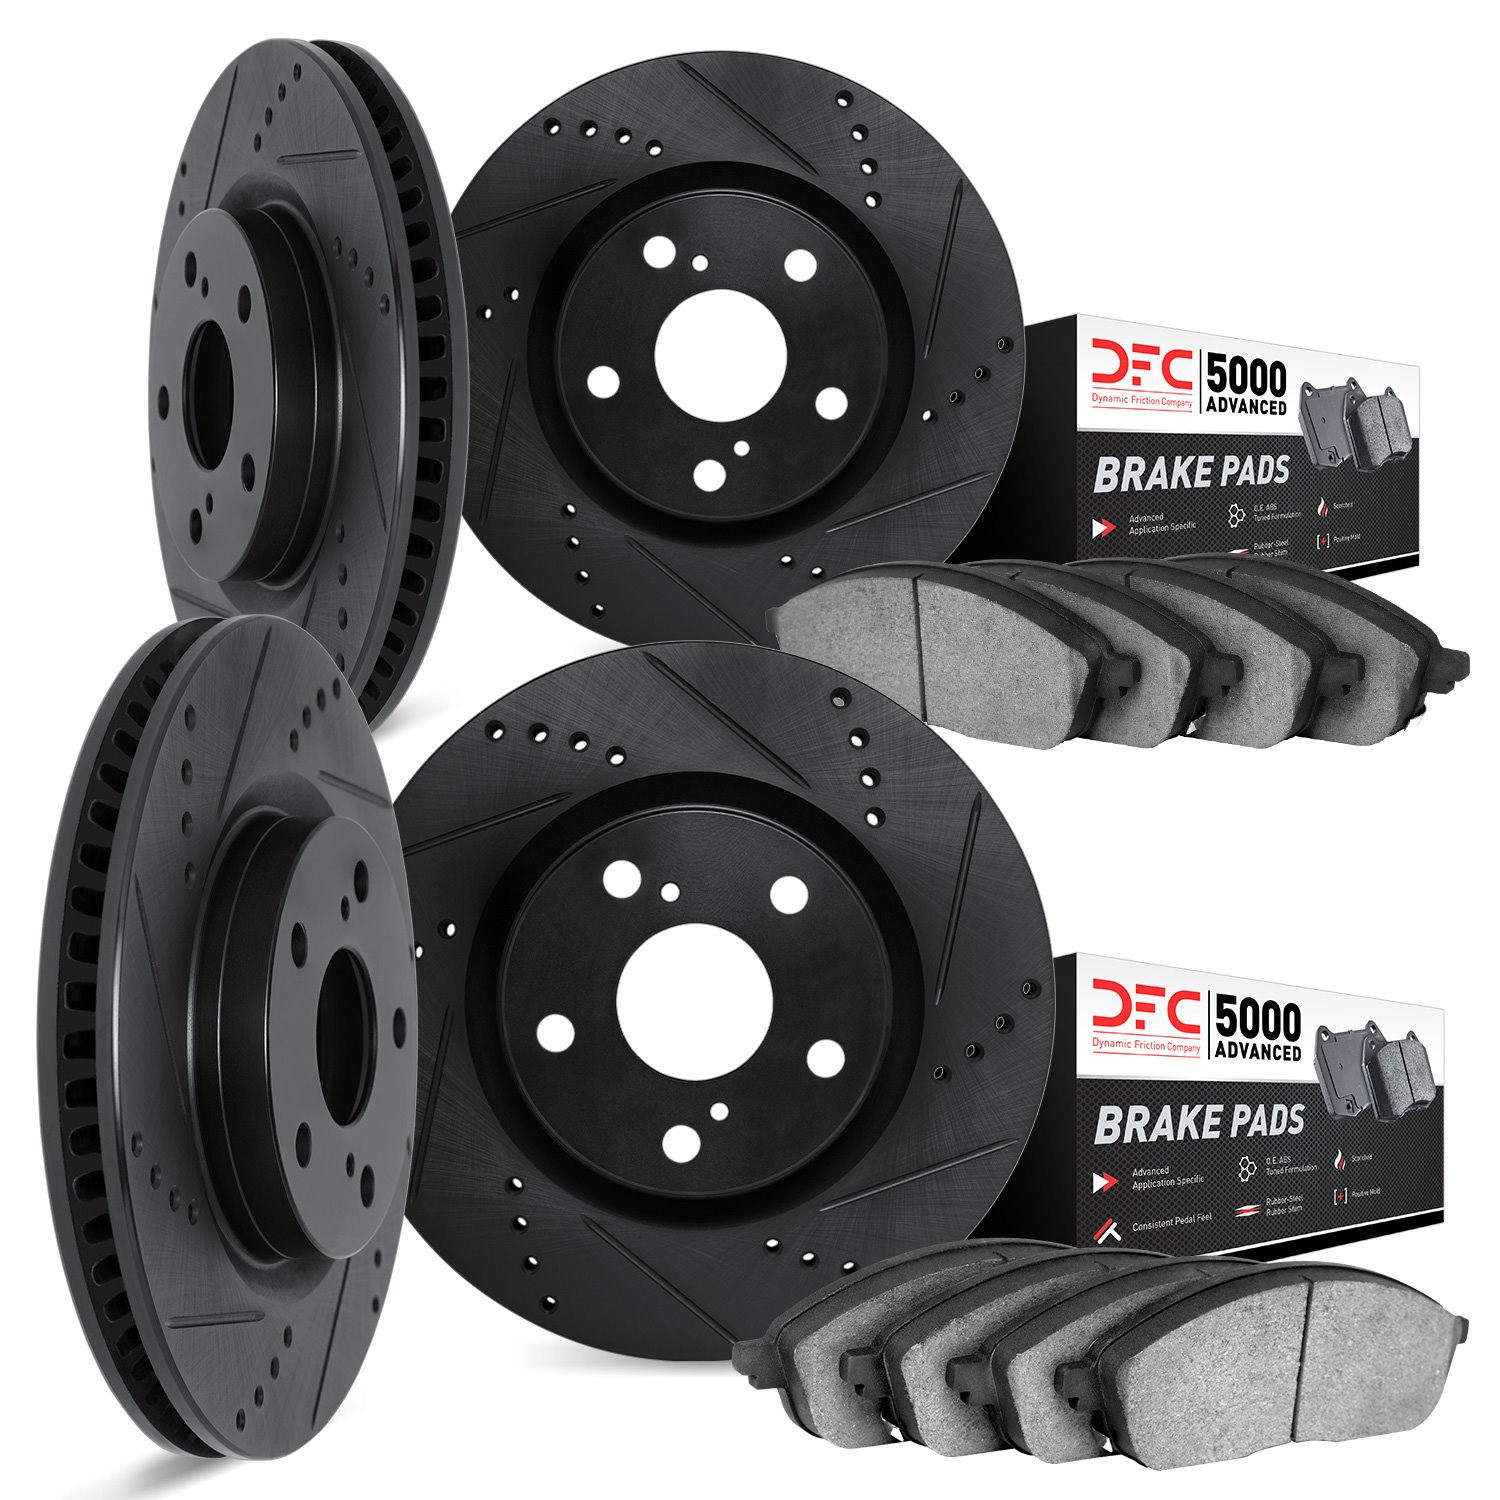 8504-02009 Drilled/Slotted Brake Rotors w/5000 Advanced Brake Pads Kit [Black], 1987-1995 Porsche, Position: Front and Rear